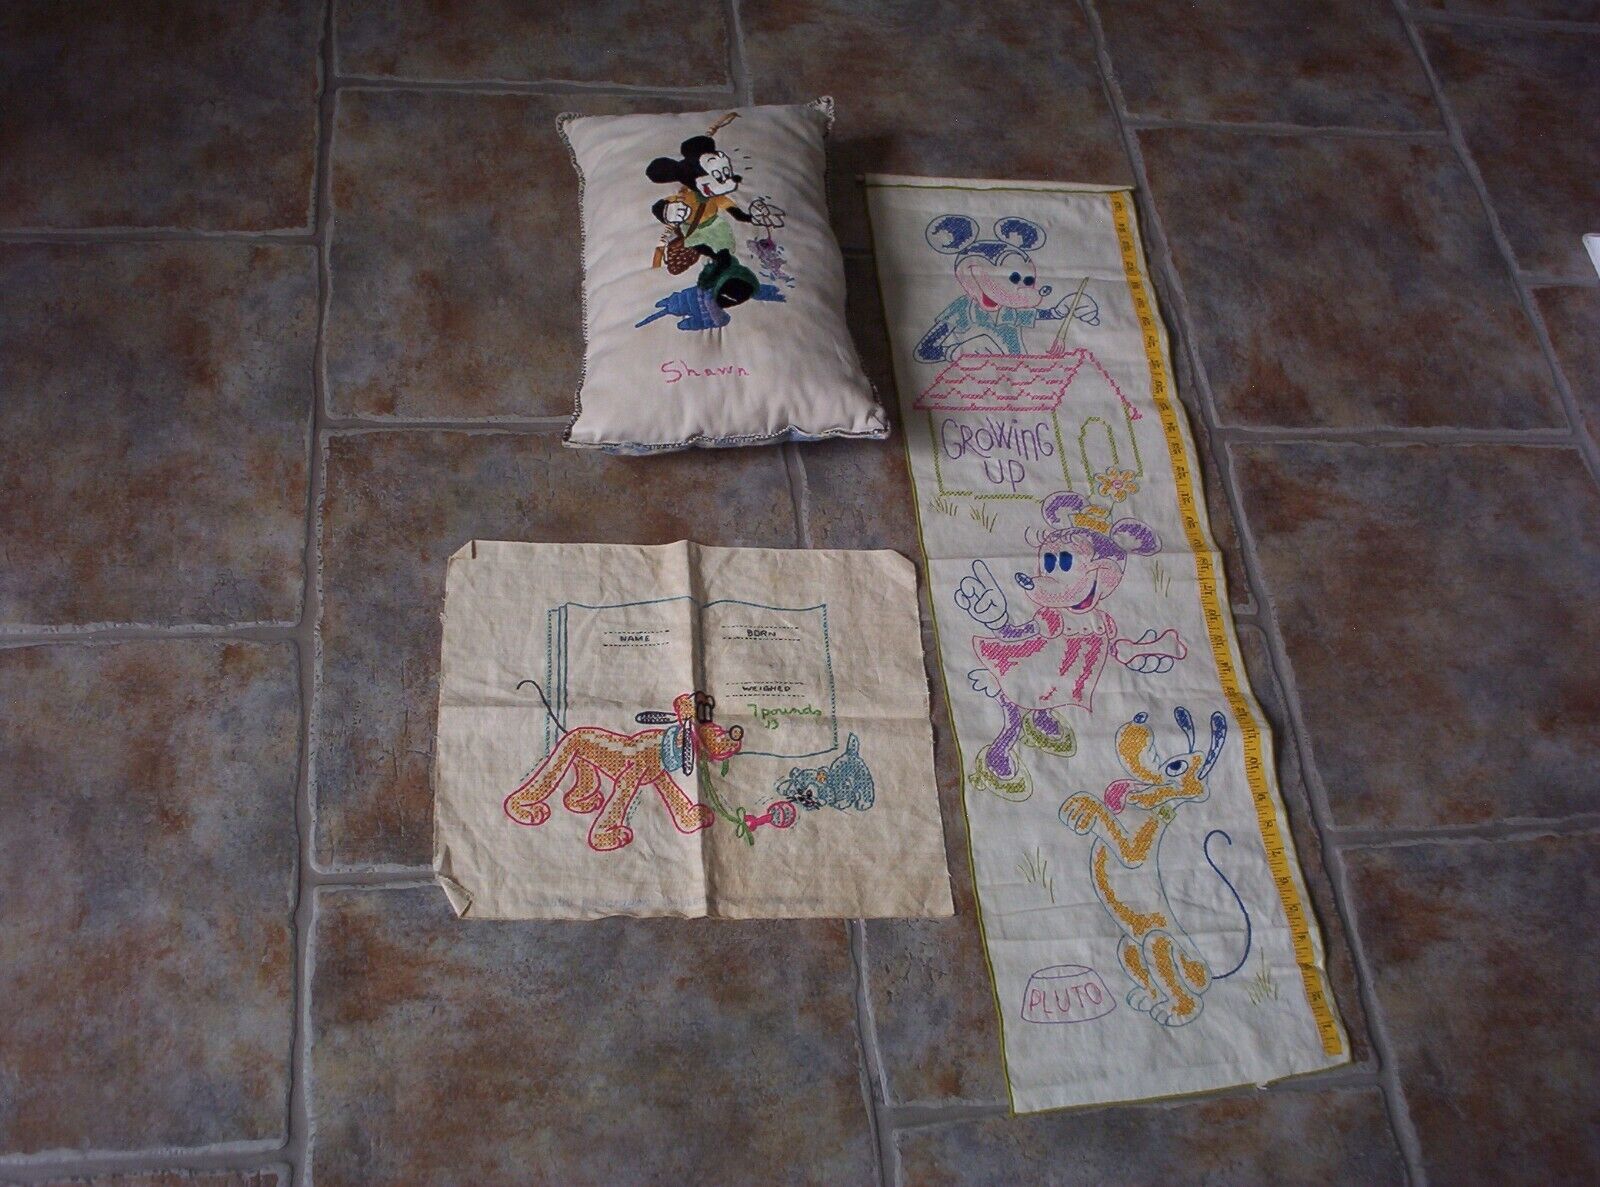 3 Vintage Disney Embroidered Cross Stitch Mickey Mouse Growth Pluto Birth Chart